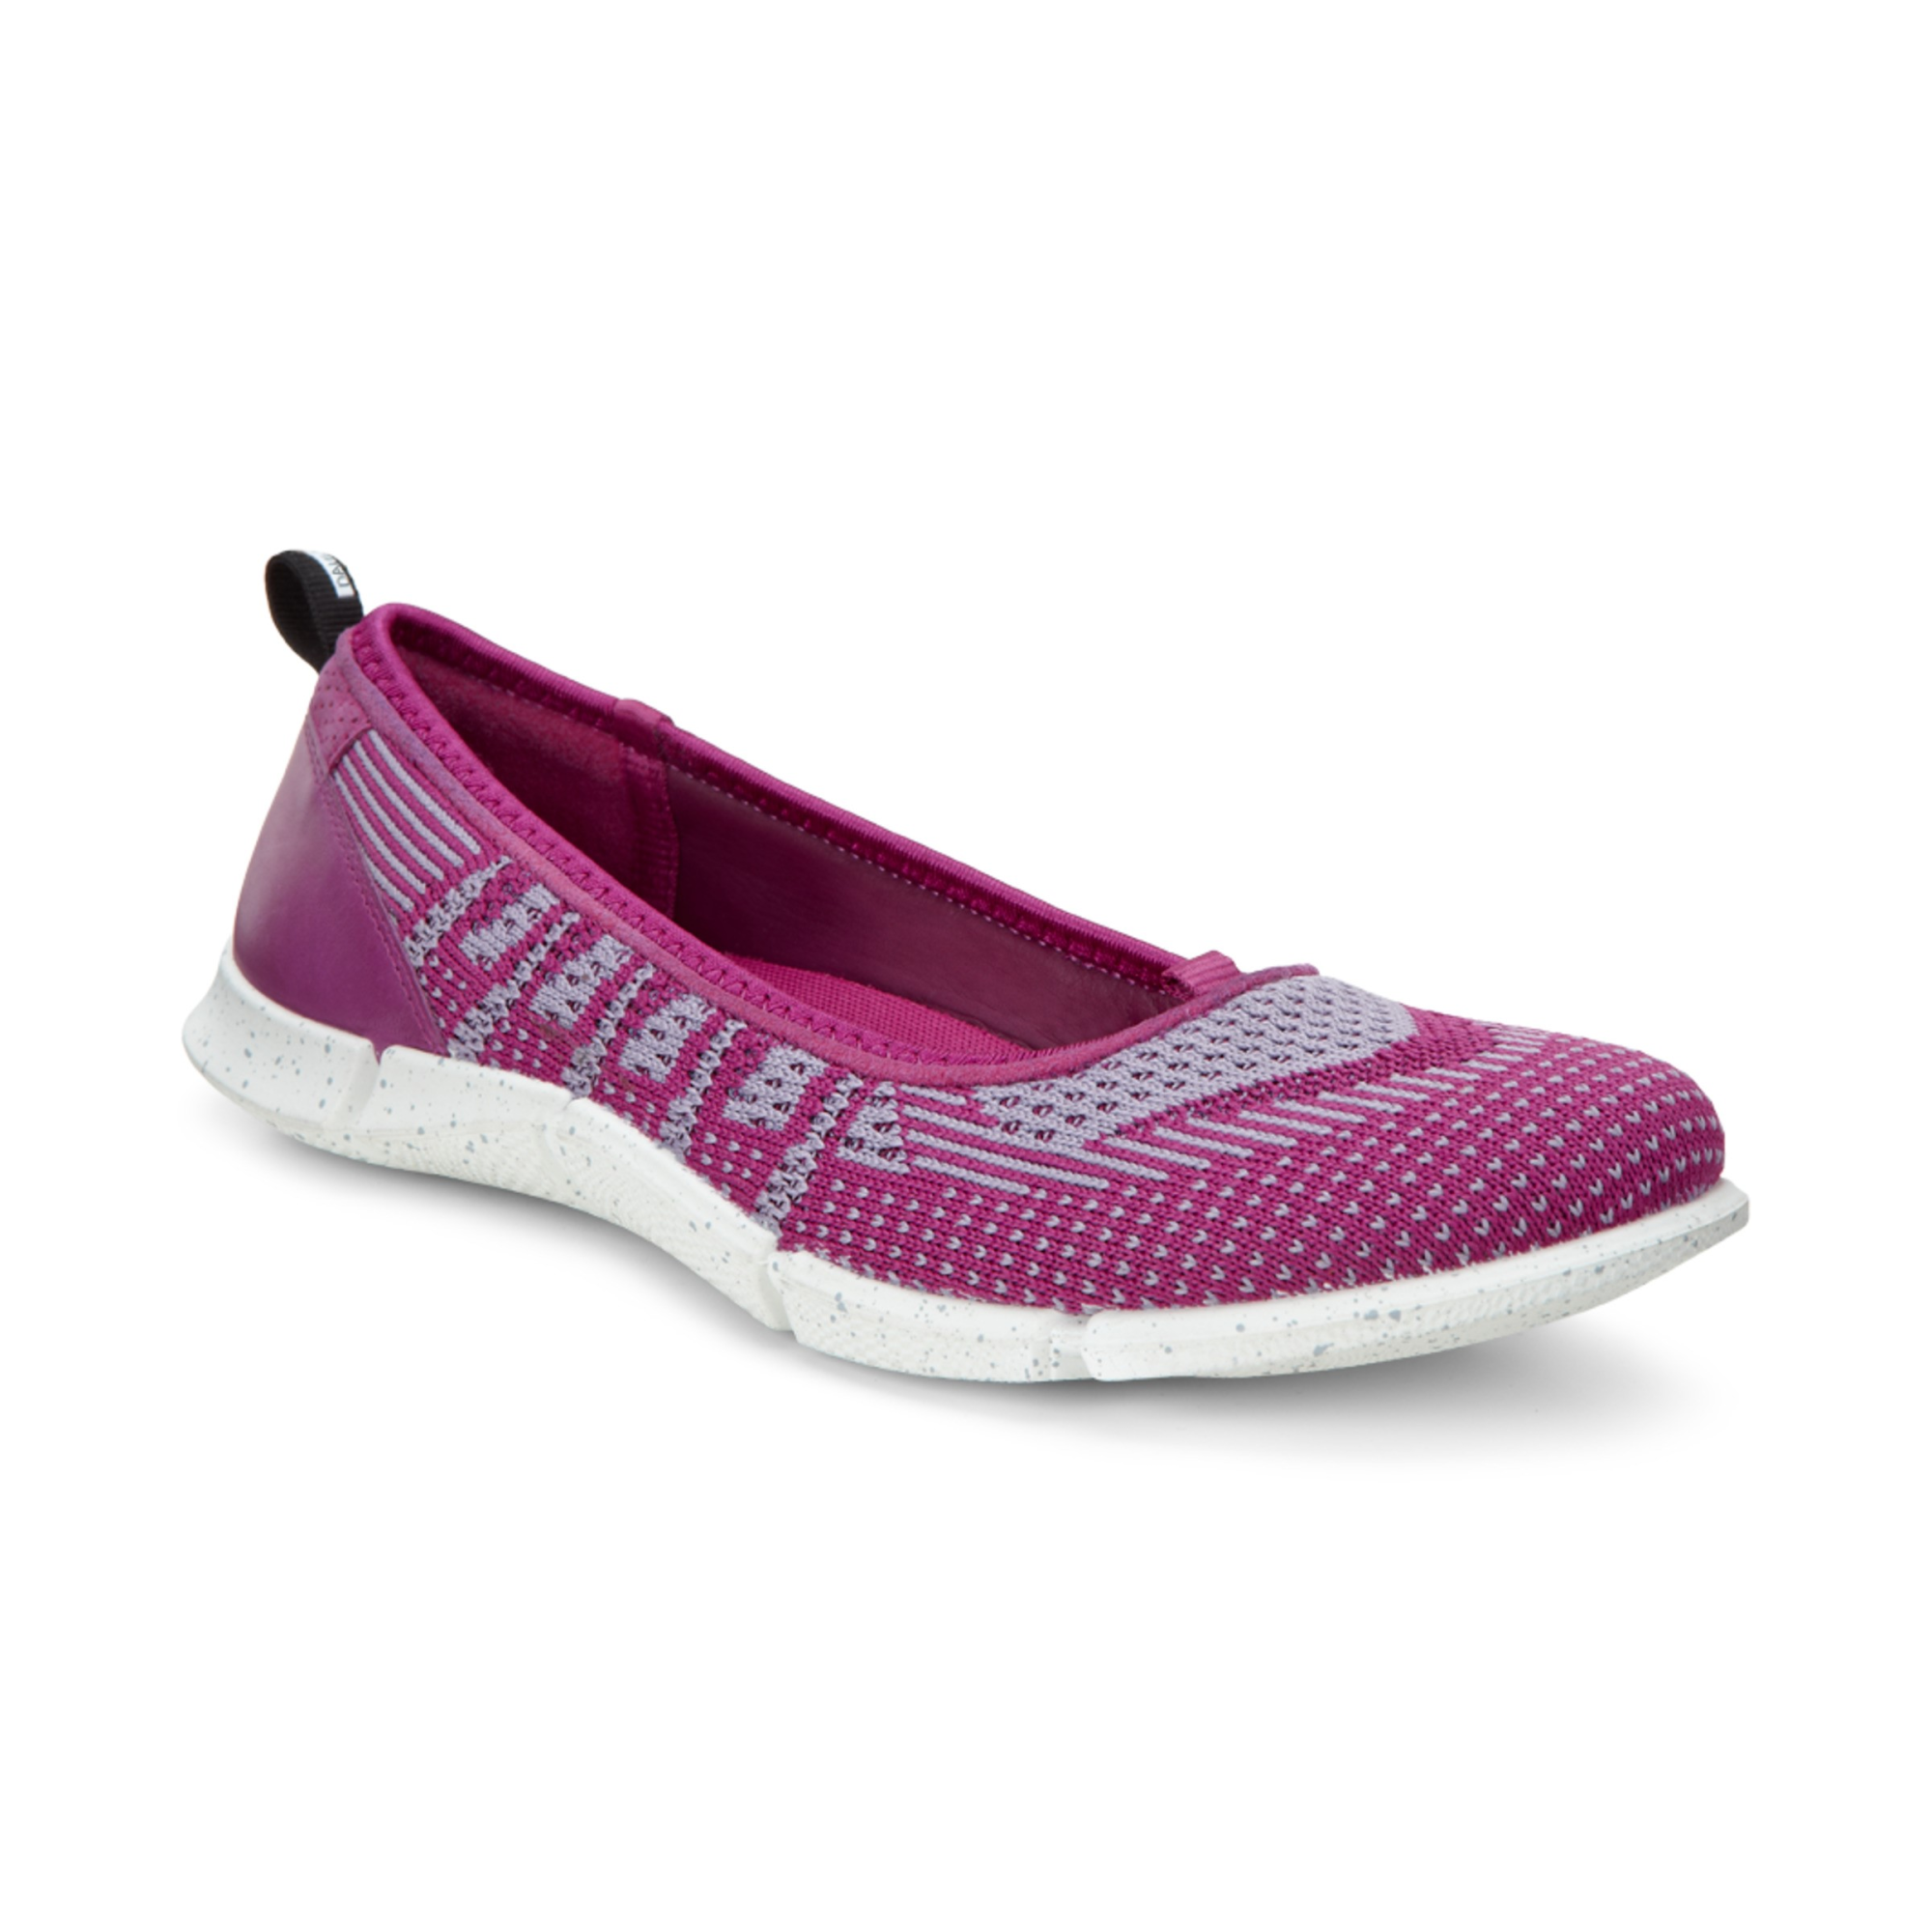 Ecco W Intrinsic Karma Flat 37 - Products - Mall - Veryk Mall, many quick response, your